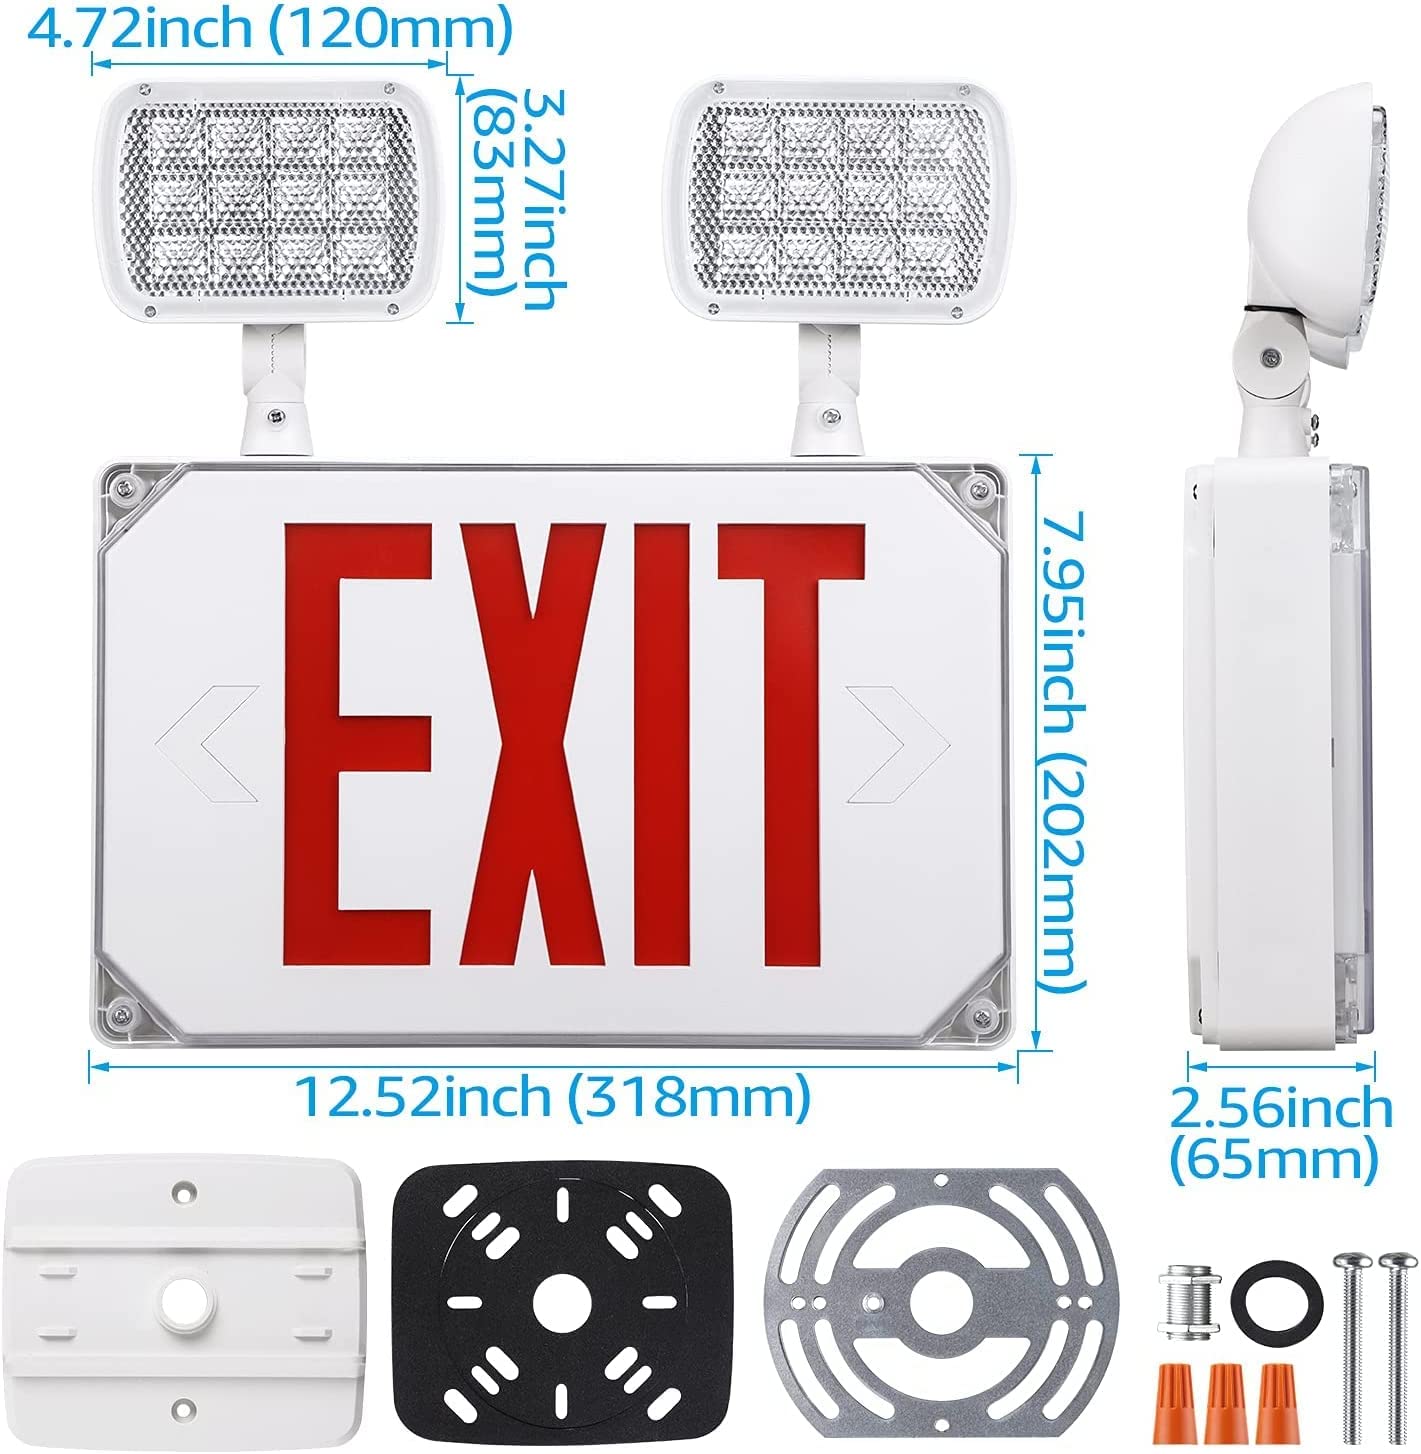 LitEgress+ Weatherproof Exit Sign with Emergency Lights - Red Letters